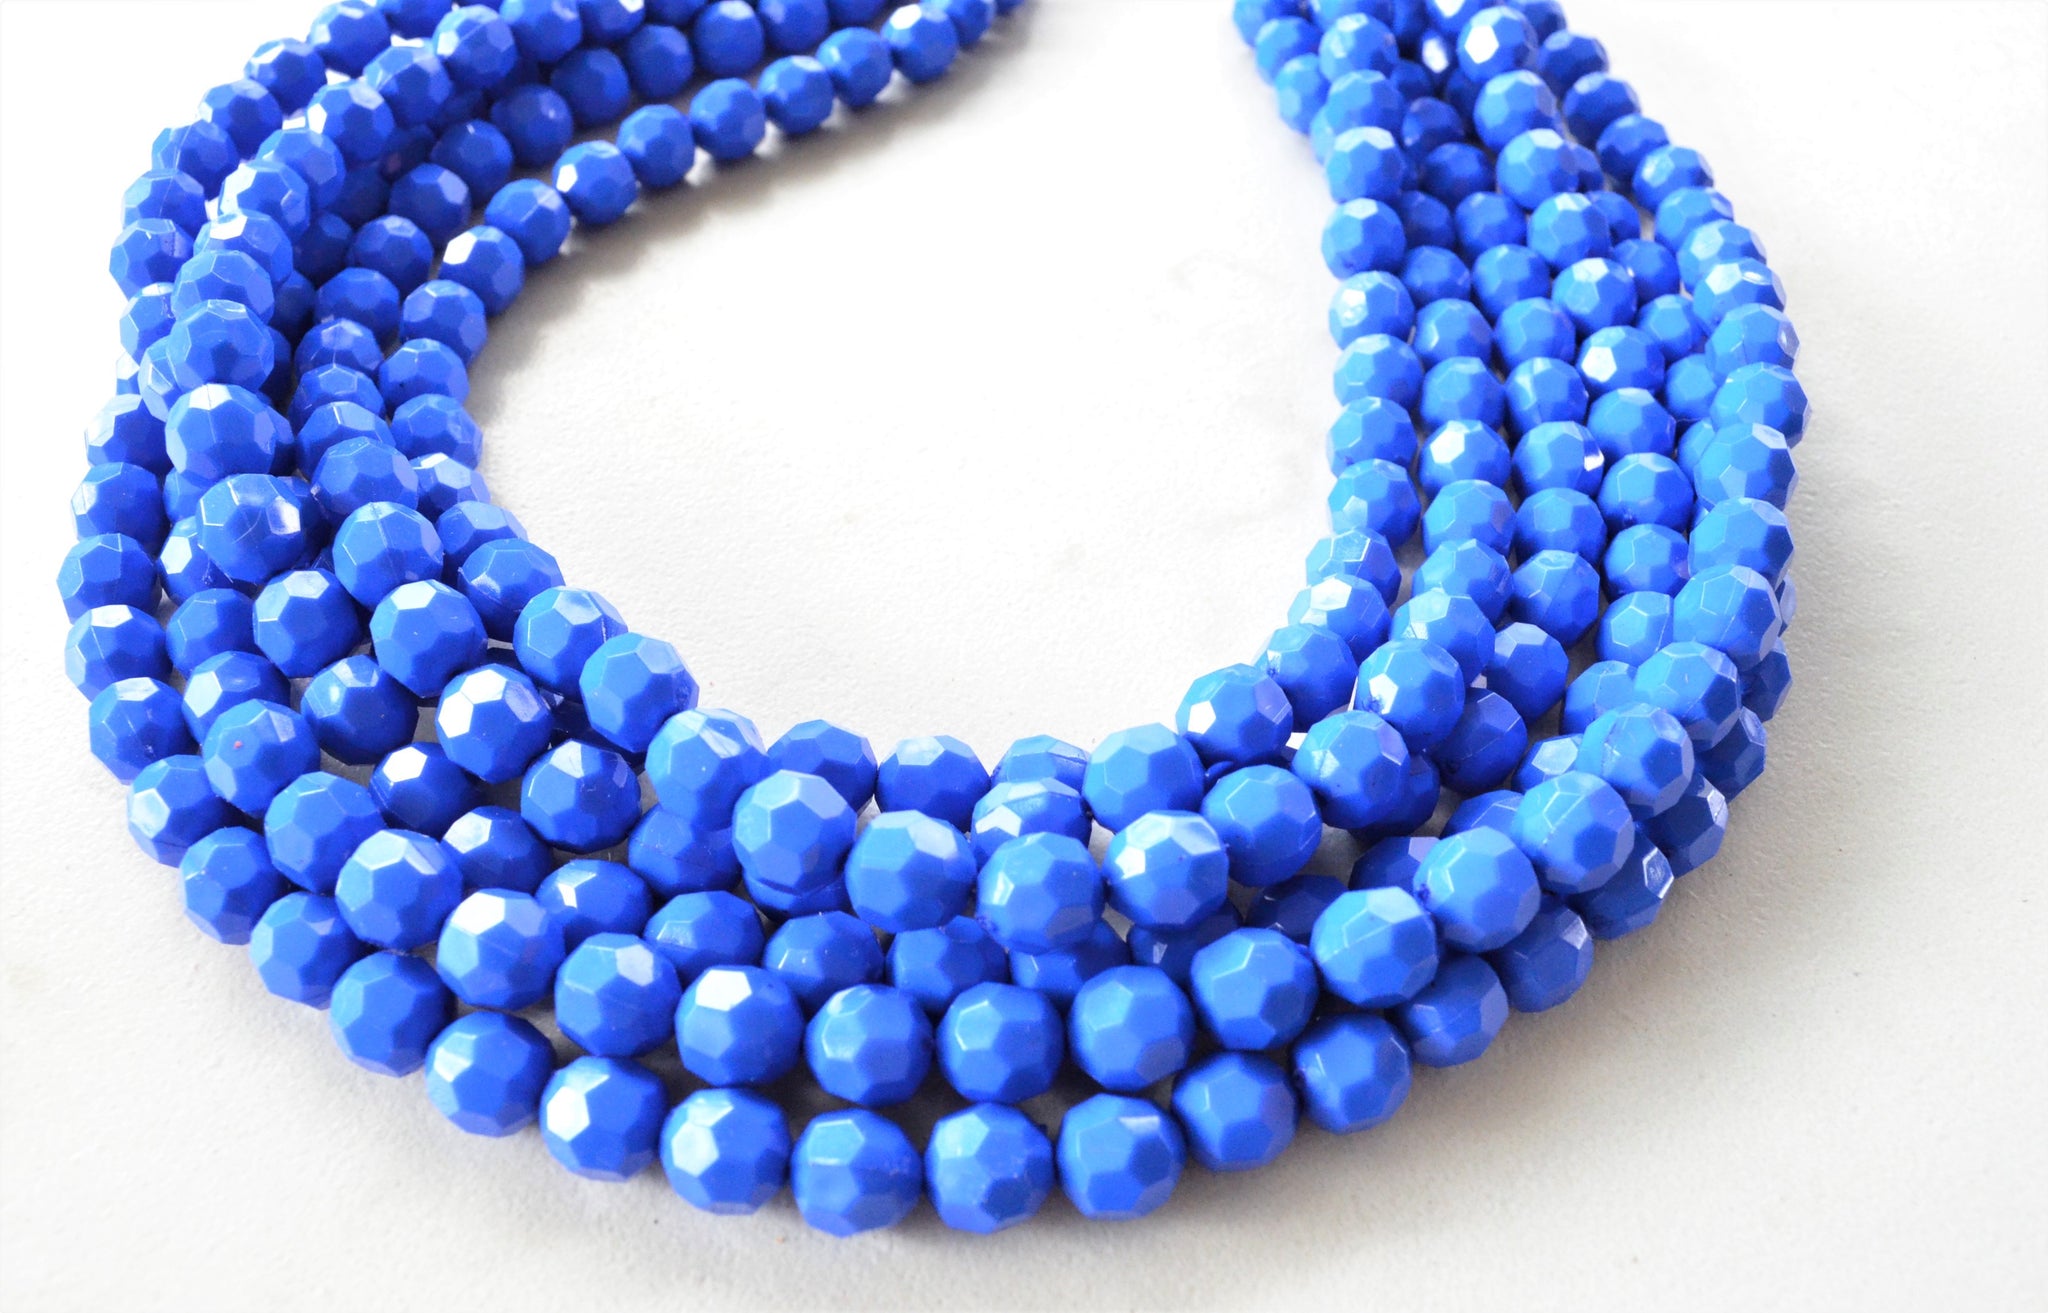 Buy Style 2 Cobalt Blue Necklace With Swarovski Crystal's, Pave Beads &  Sterling Silver Accents Online in India - Etsy